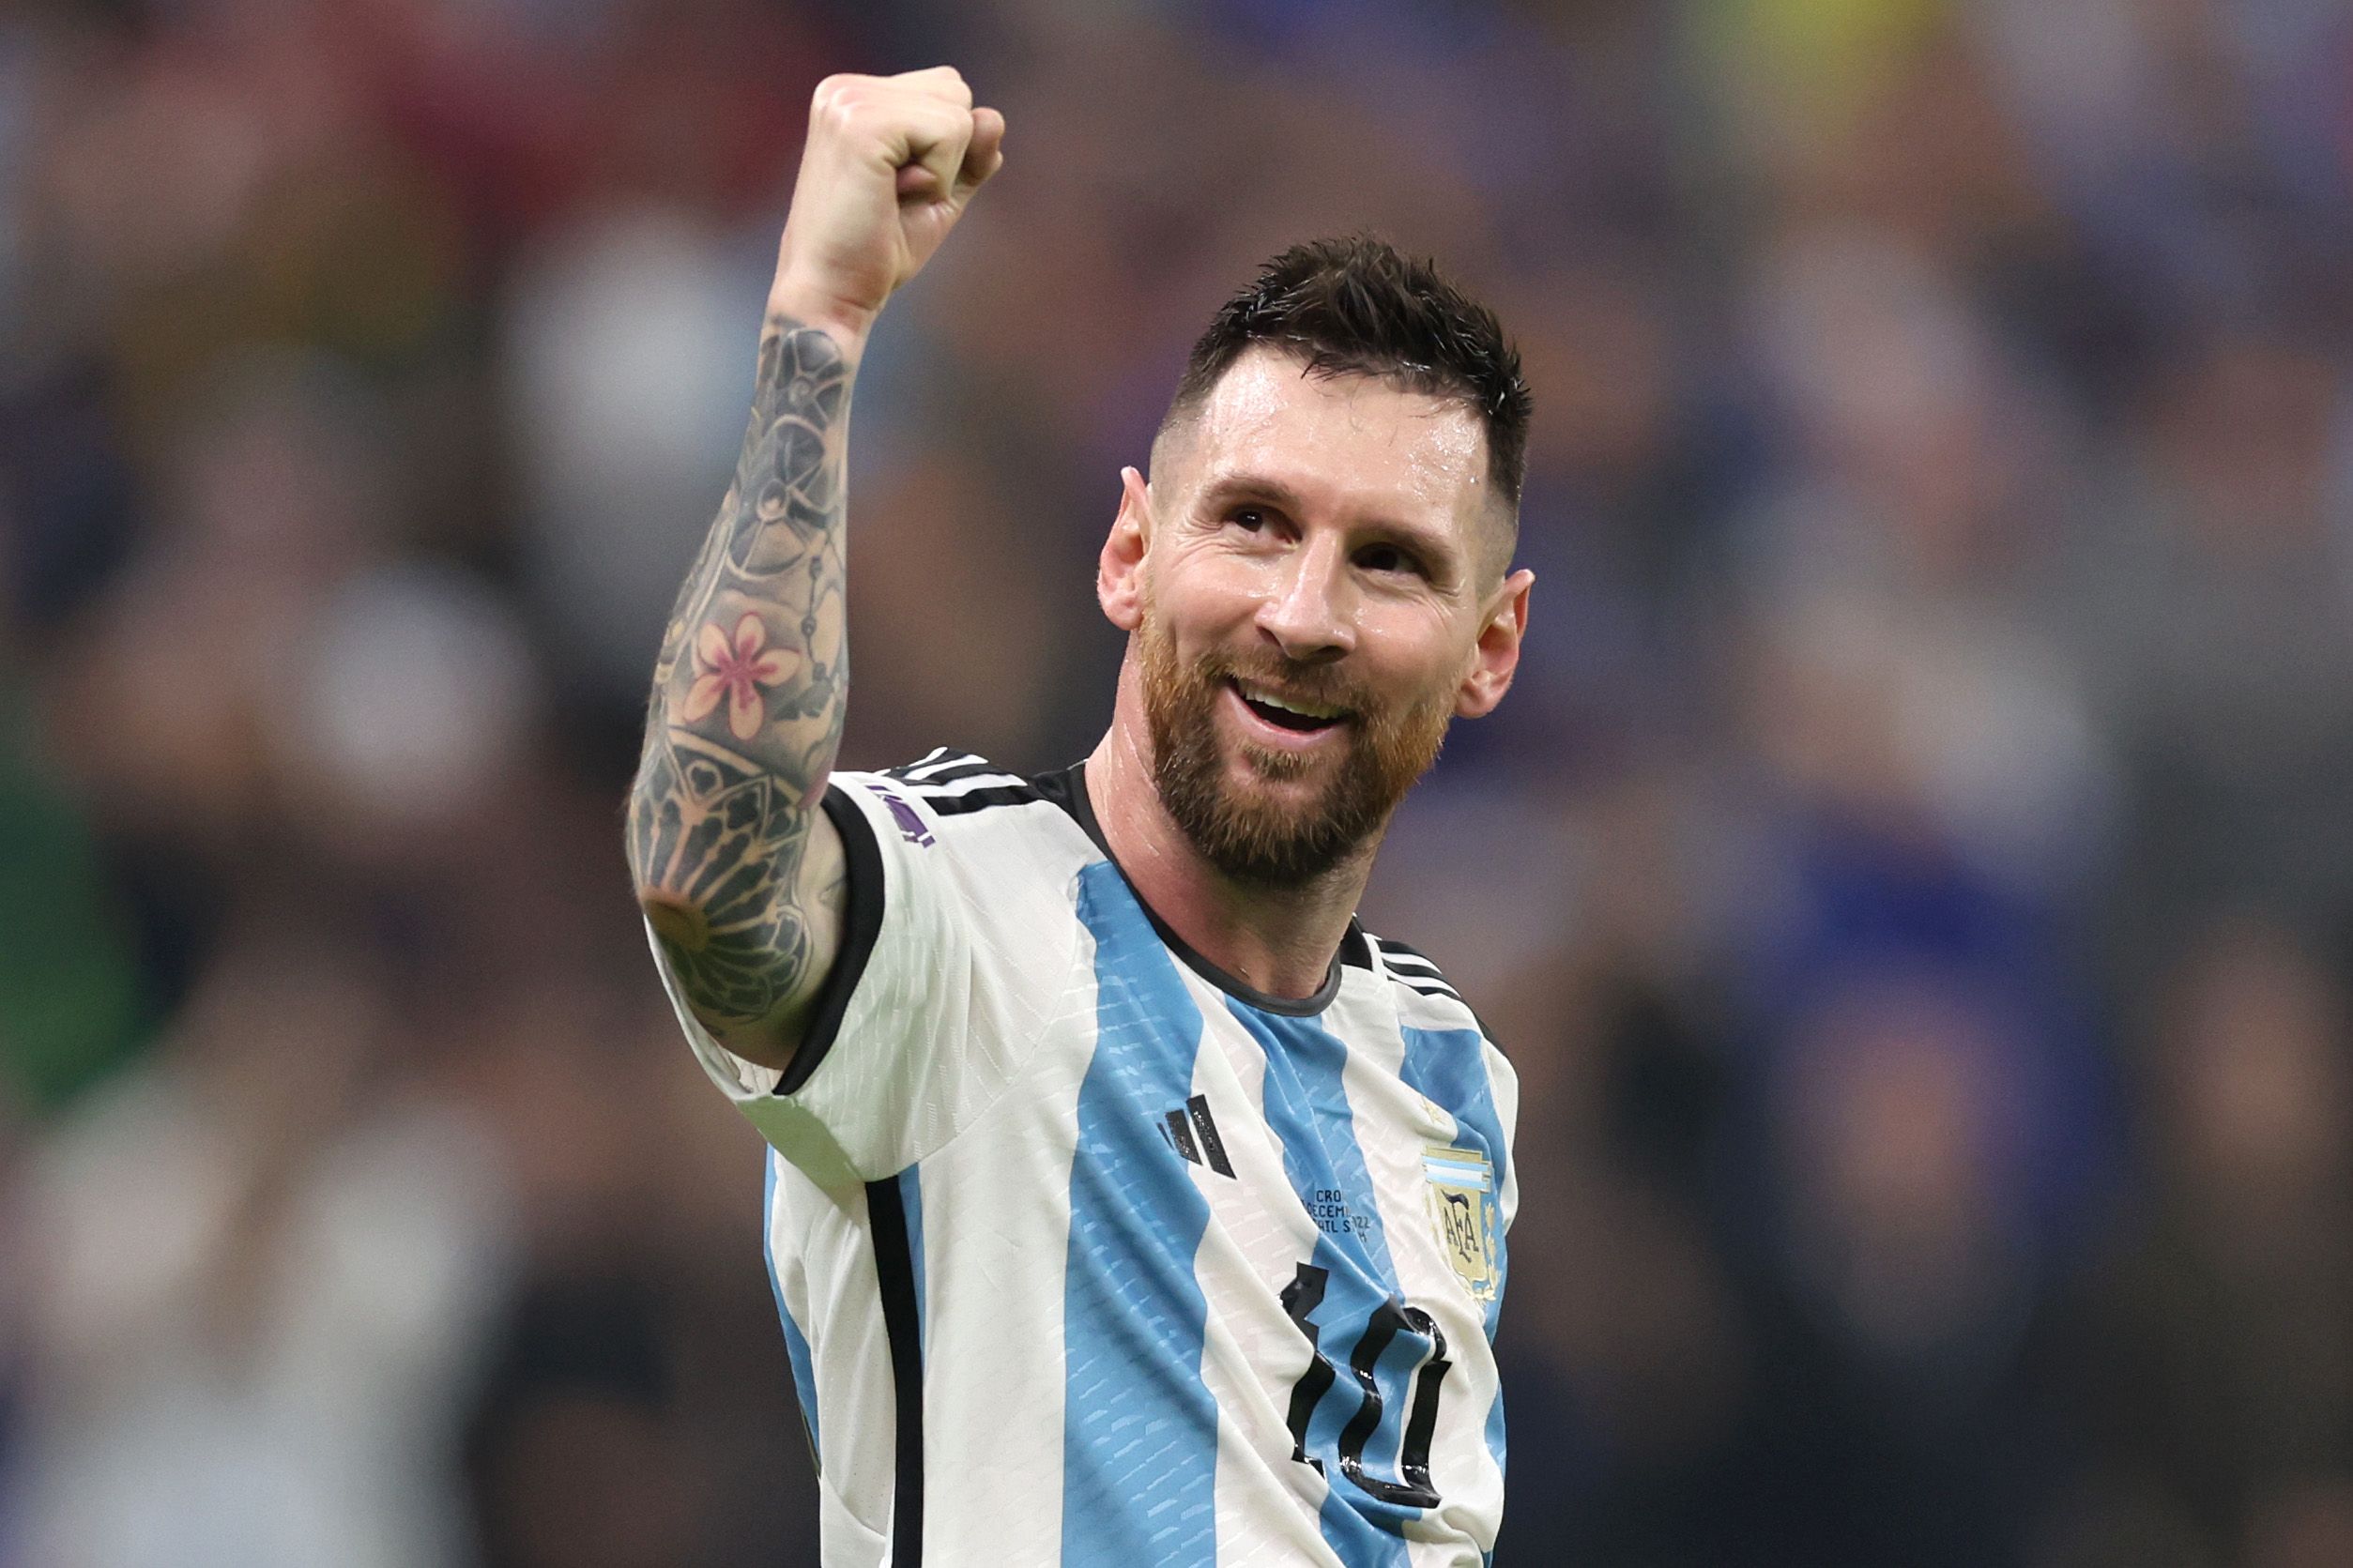 messi brief biography